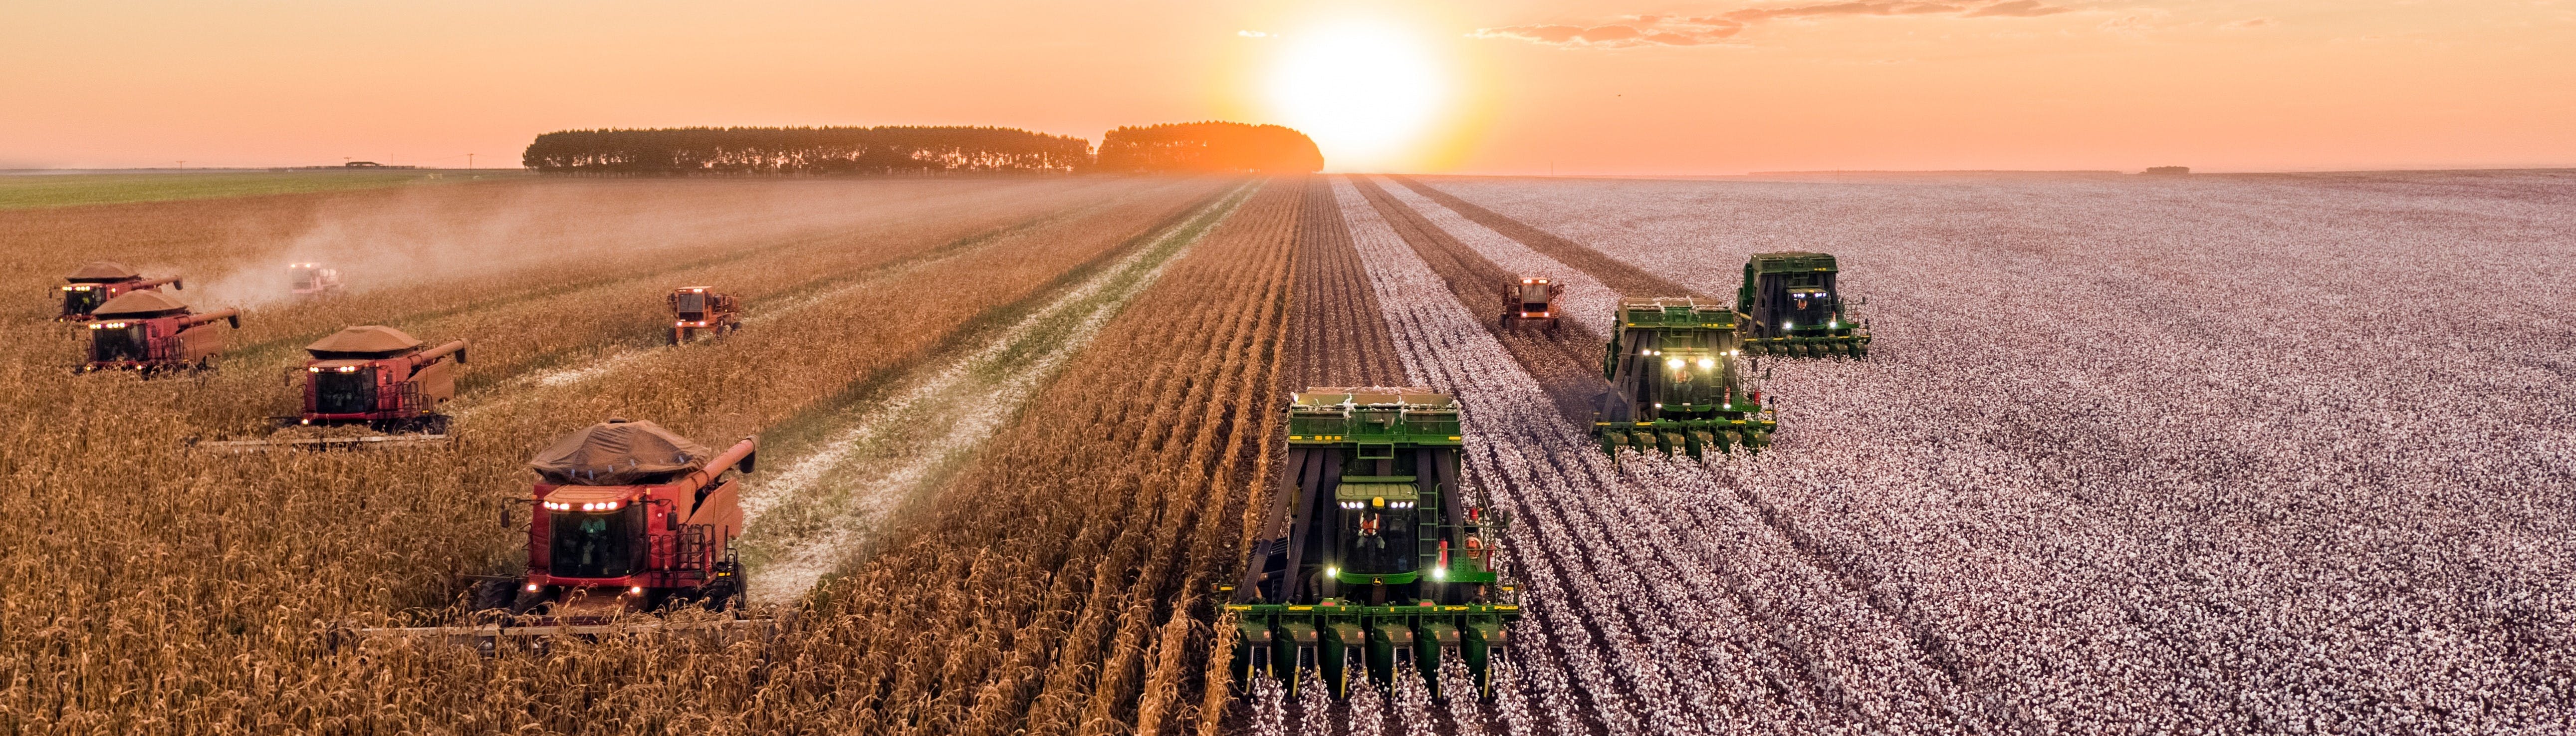 Why You Should Study a Master's in Agricultural Economics in 2021 -  MastersPortal.com